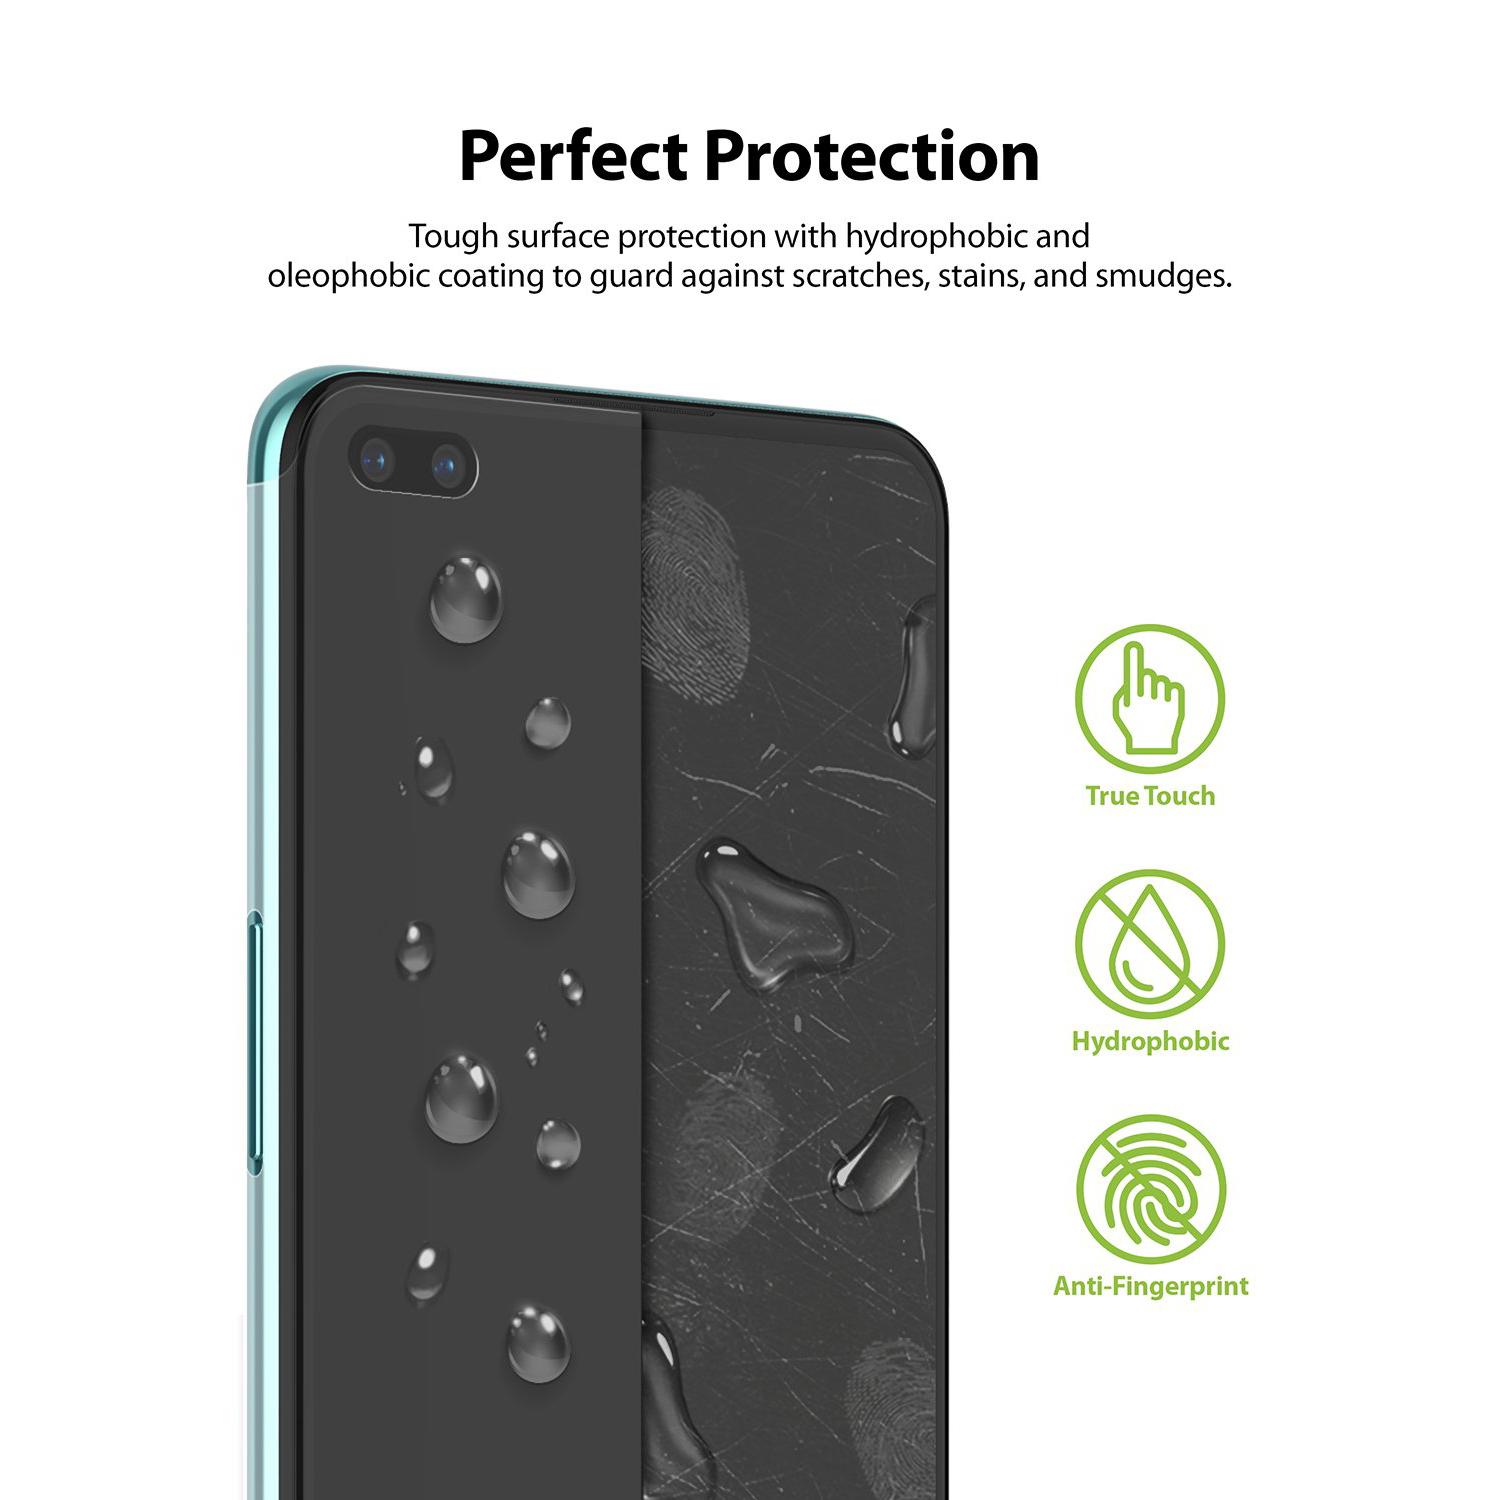 Dual Easy Wing Screen Protector OnePlus Nord (2-pack)